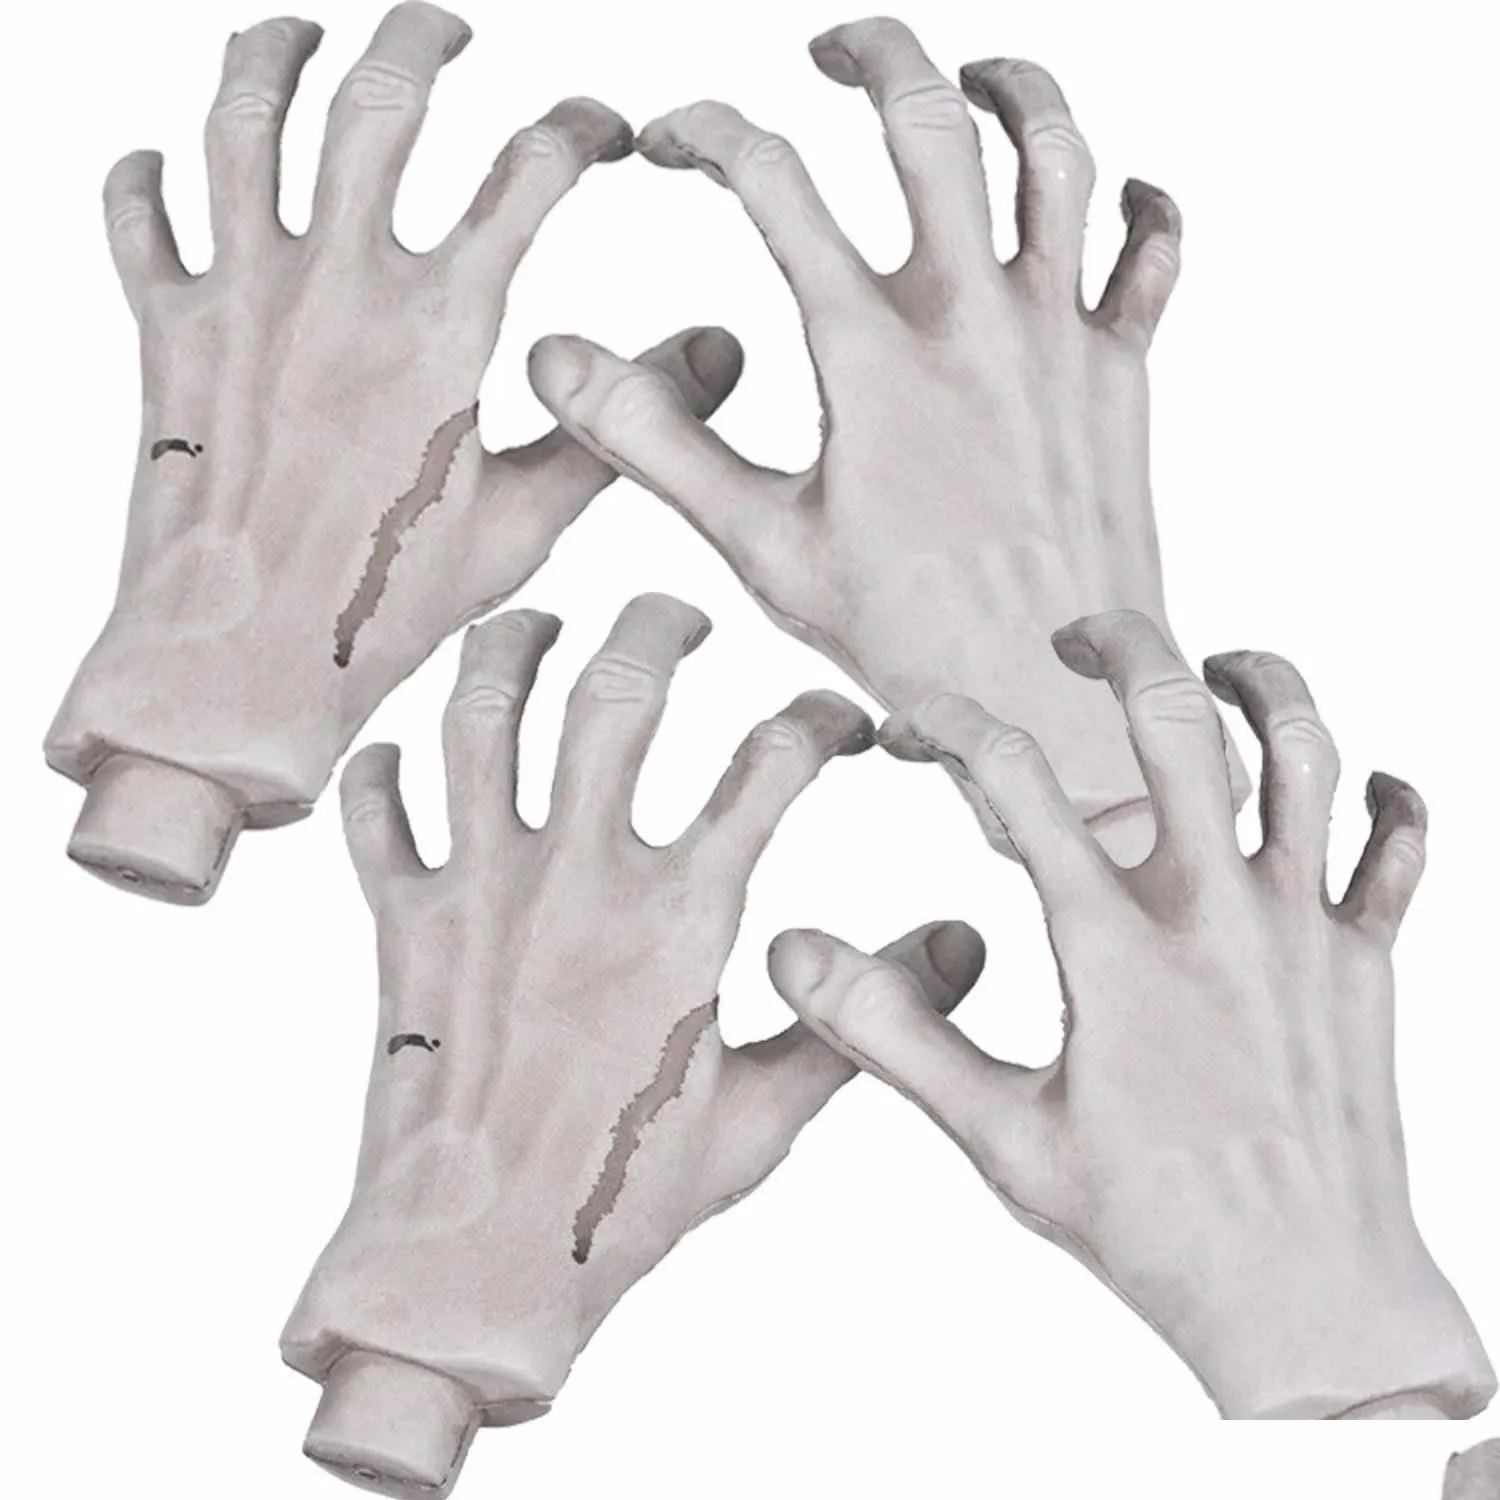 party decoration halloween skeleton hands realistic life size severed fake plastic for props ampwc